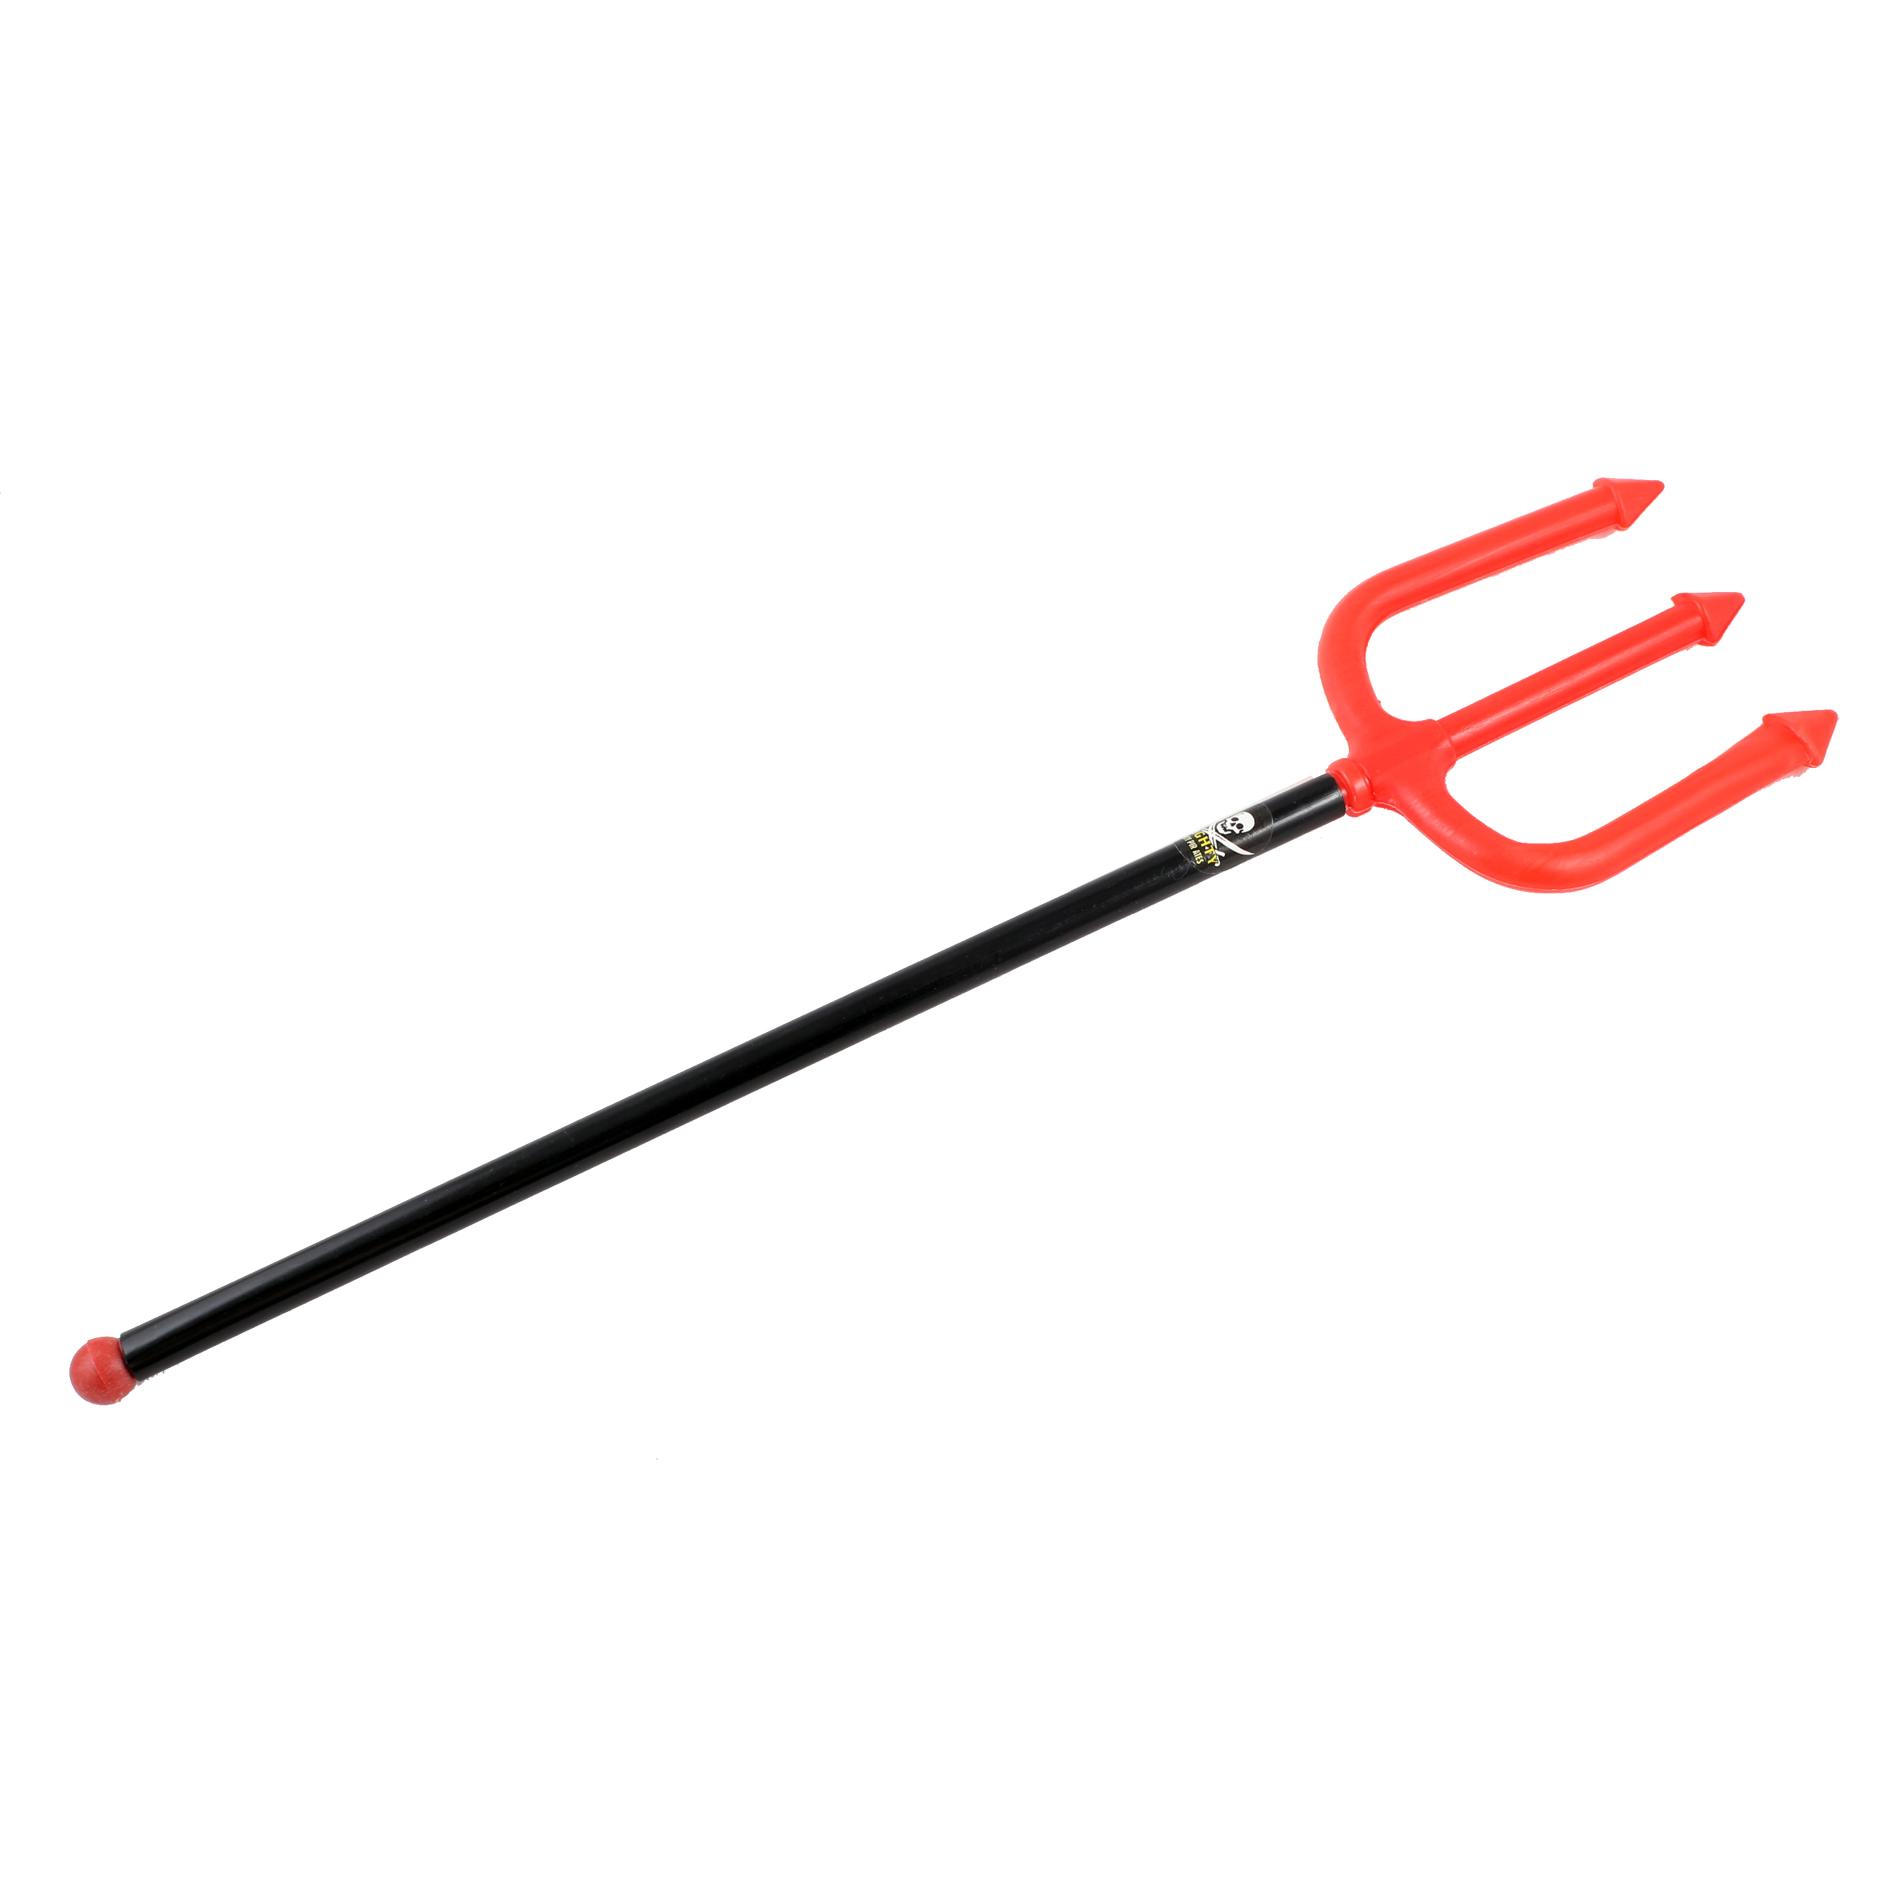 Halloween Costume Devil Pitchfork Red Trident Fork Weapon Toys Prop for Kids Accessories